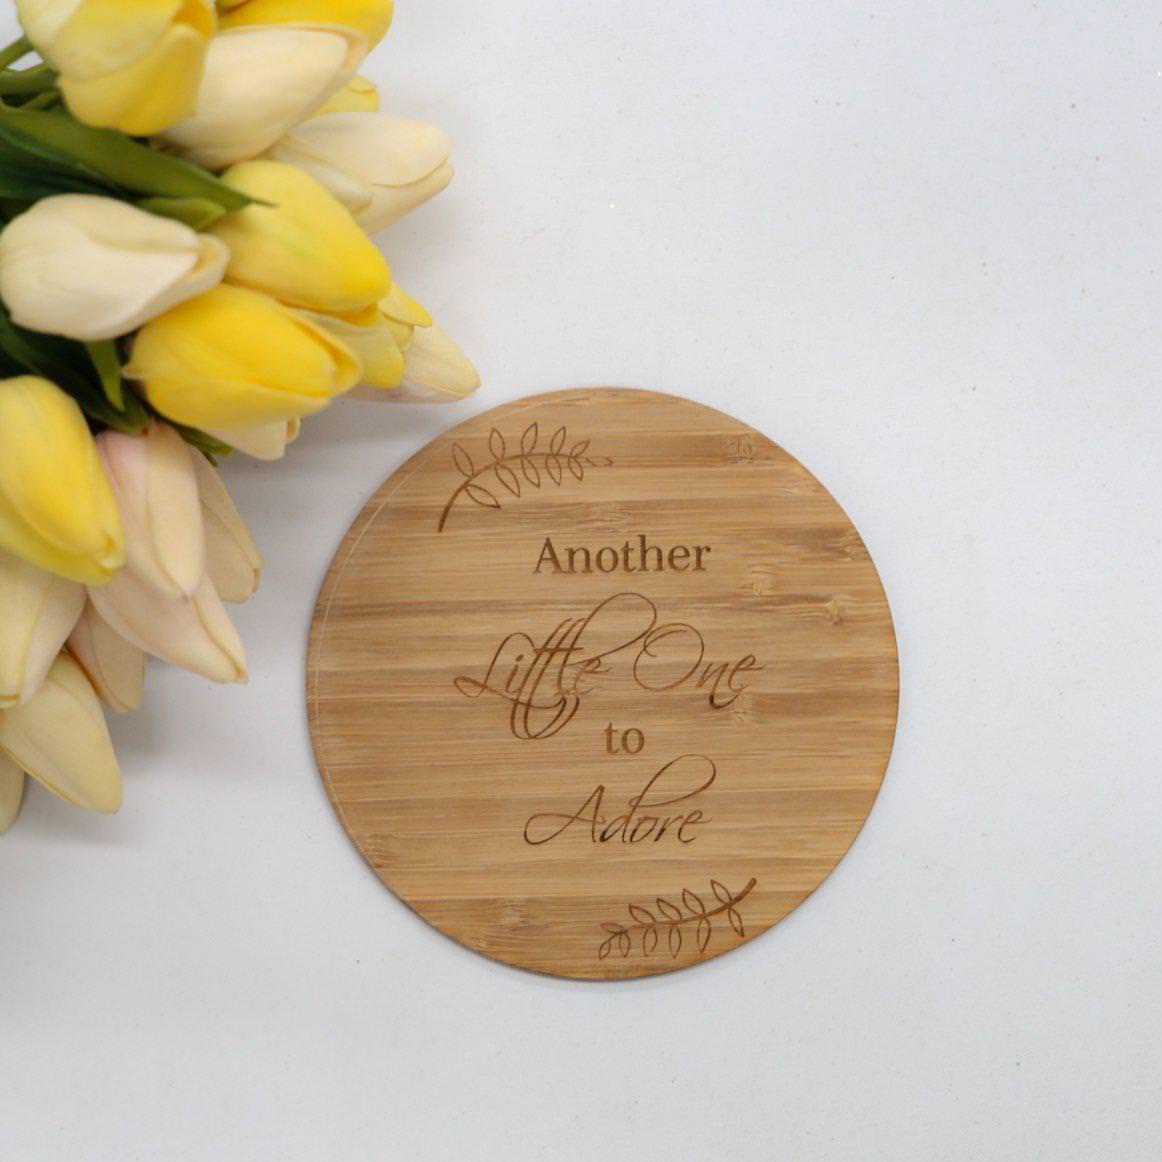 Another little one to adore Birth Announcement Plaque